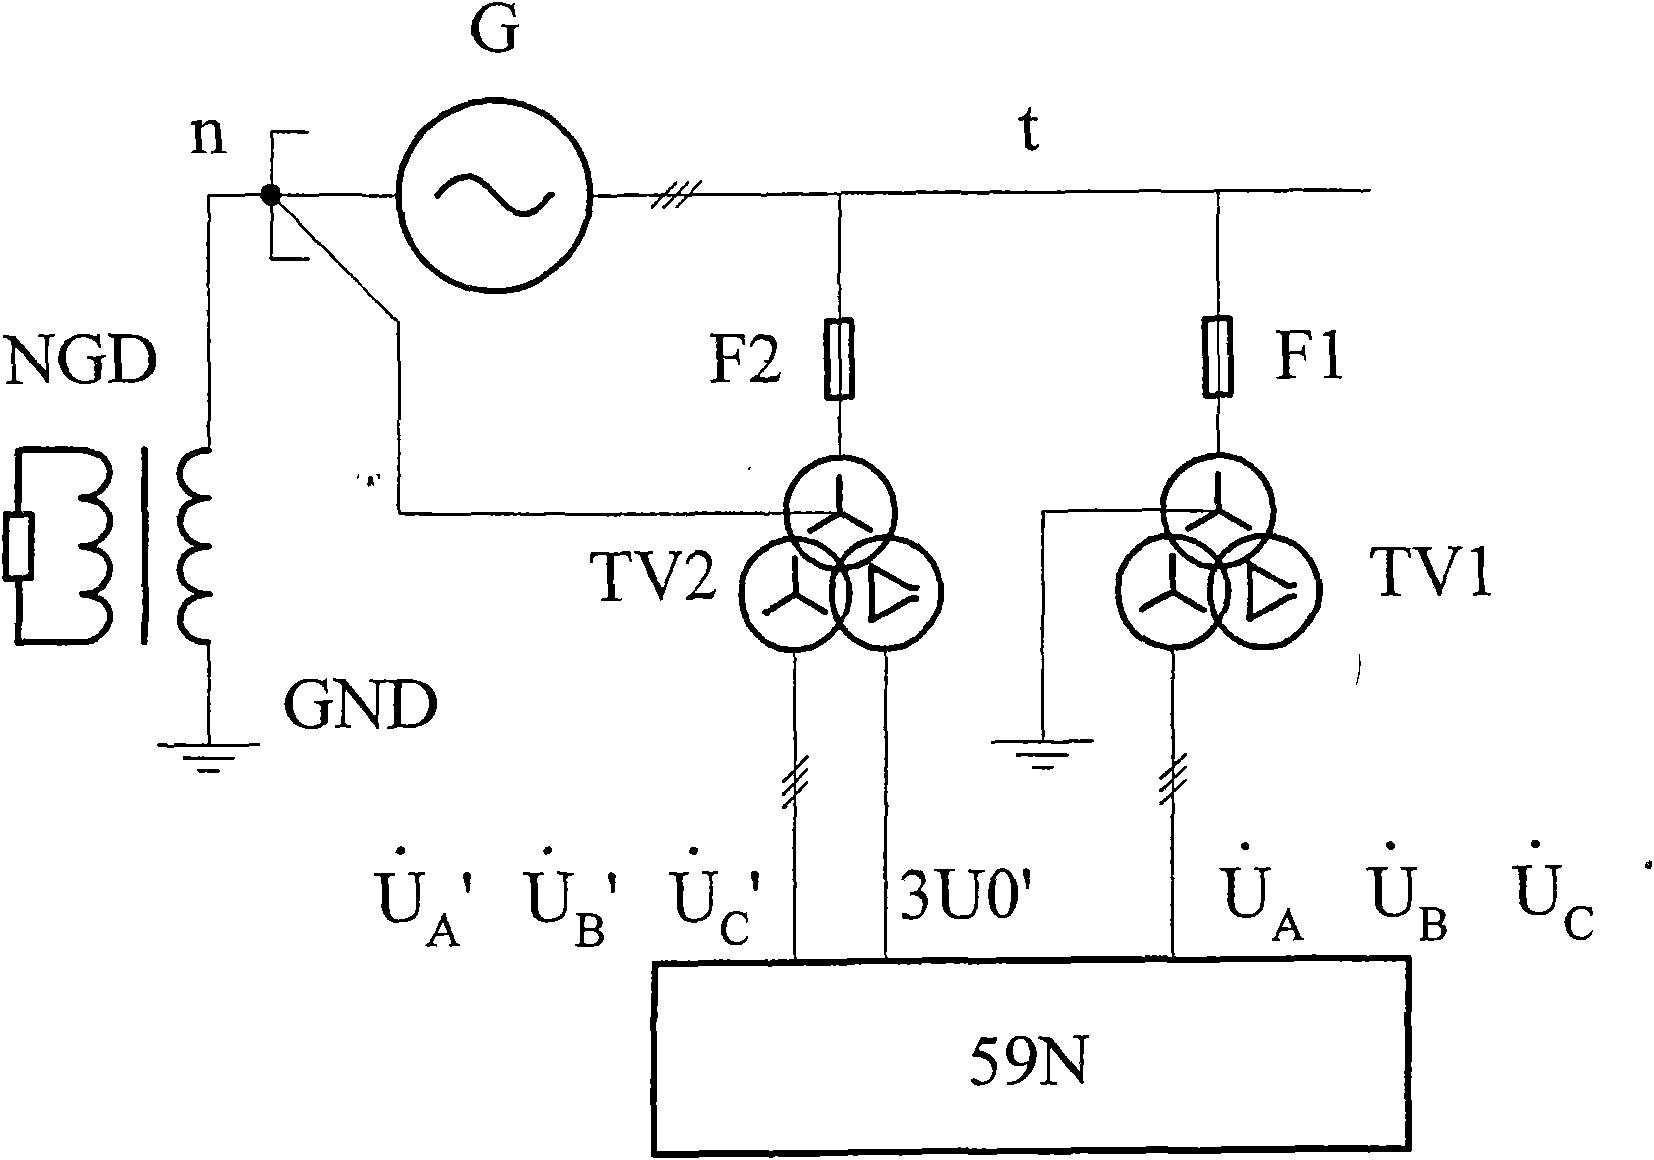 Judgment method of line breakage of special TV for inter-turn protection of generator